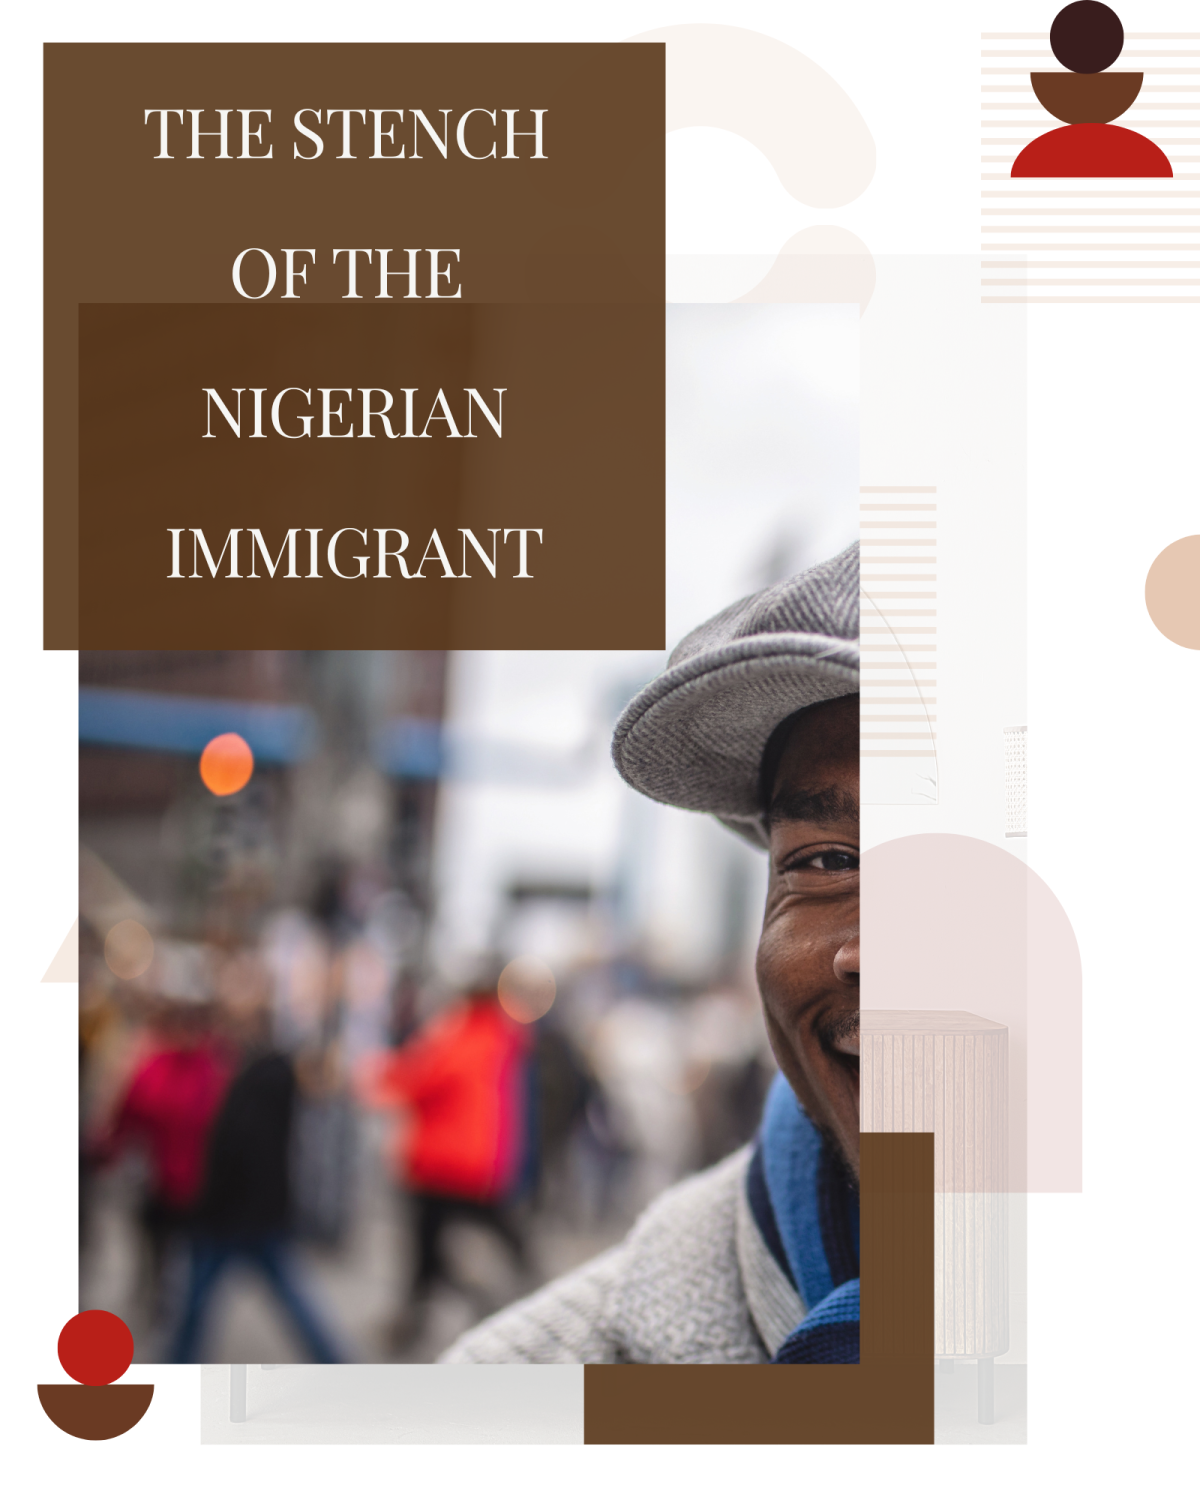 THE STENCH OF THE NIGERIAN IMMIGRANT